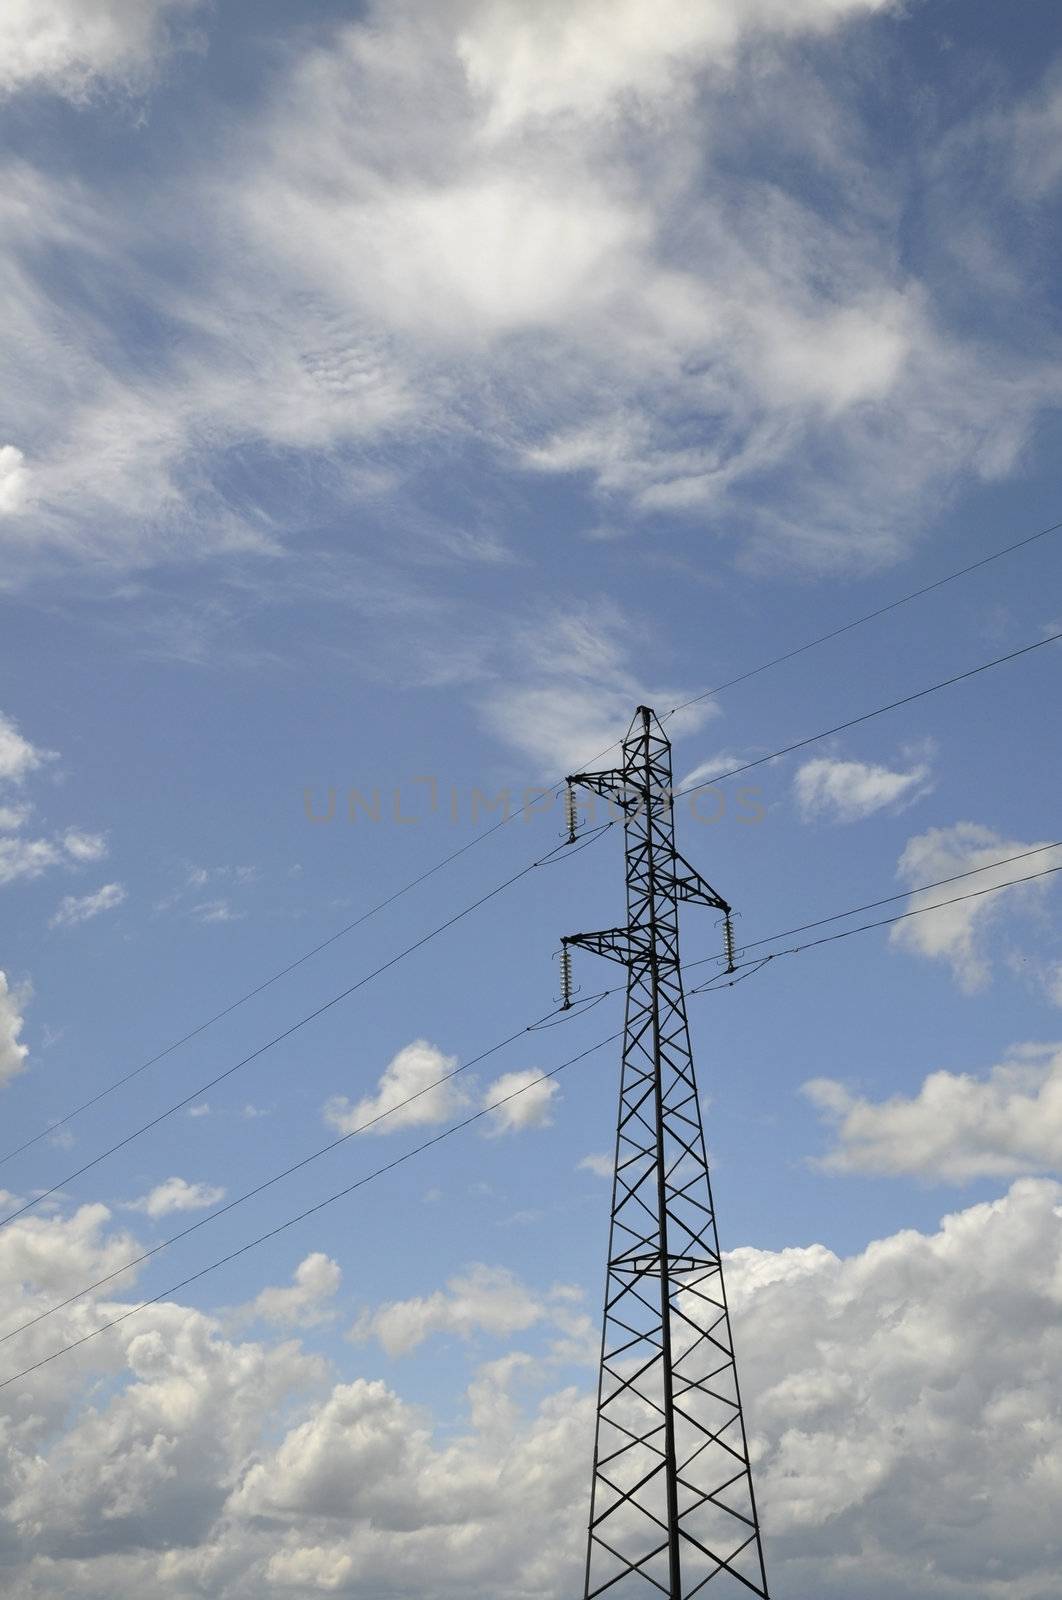 Electricity Pylon with a Blue and Cloudy Sky by shkyo30